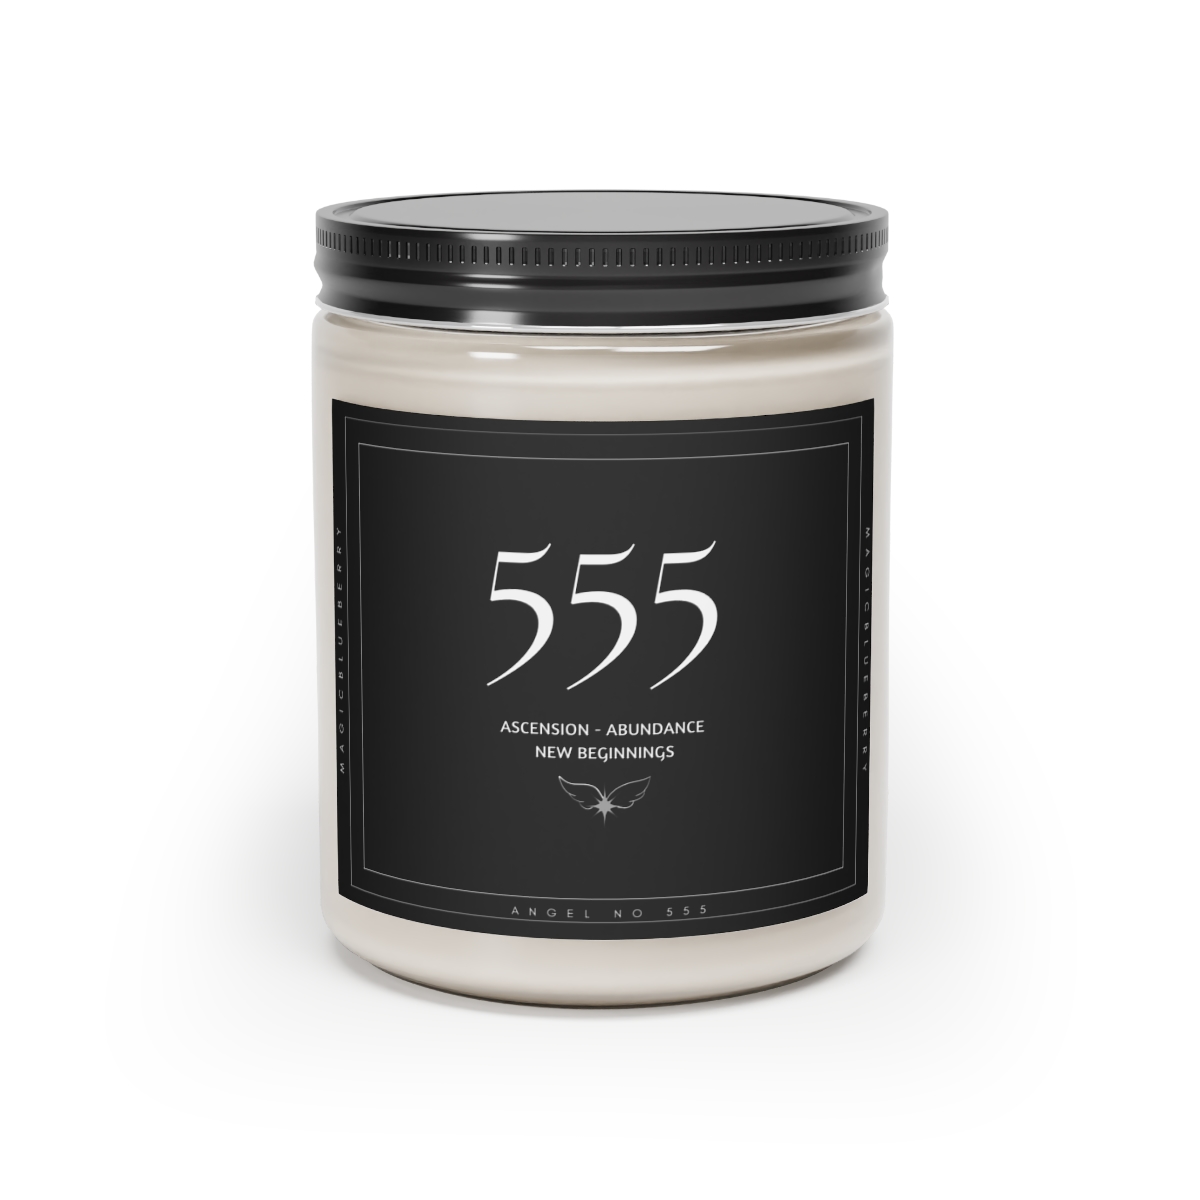 Angel Spell 555 - Scented Vegan Soy Wax Candles, Clear Jar Candle, Spell Candles, Sassy Candle, Vegan Candle, Cotton Wick Candle product thumbnail image